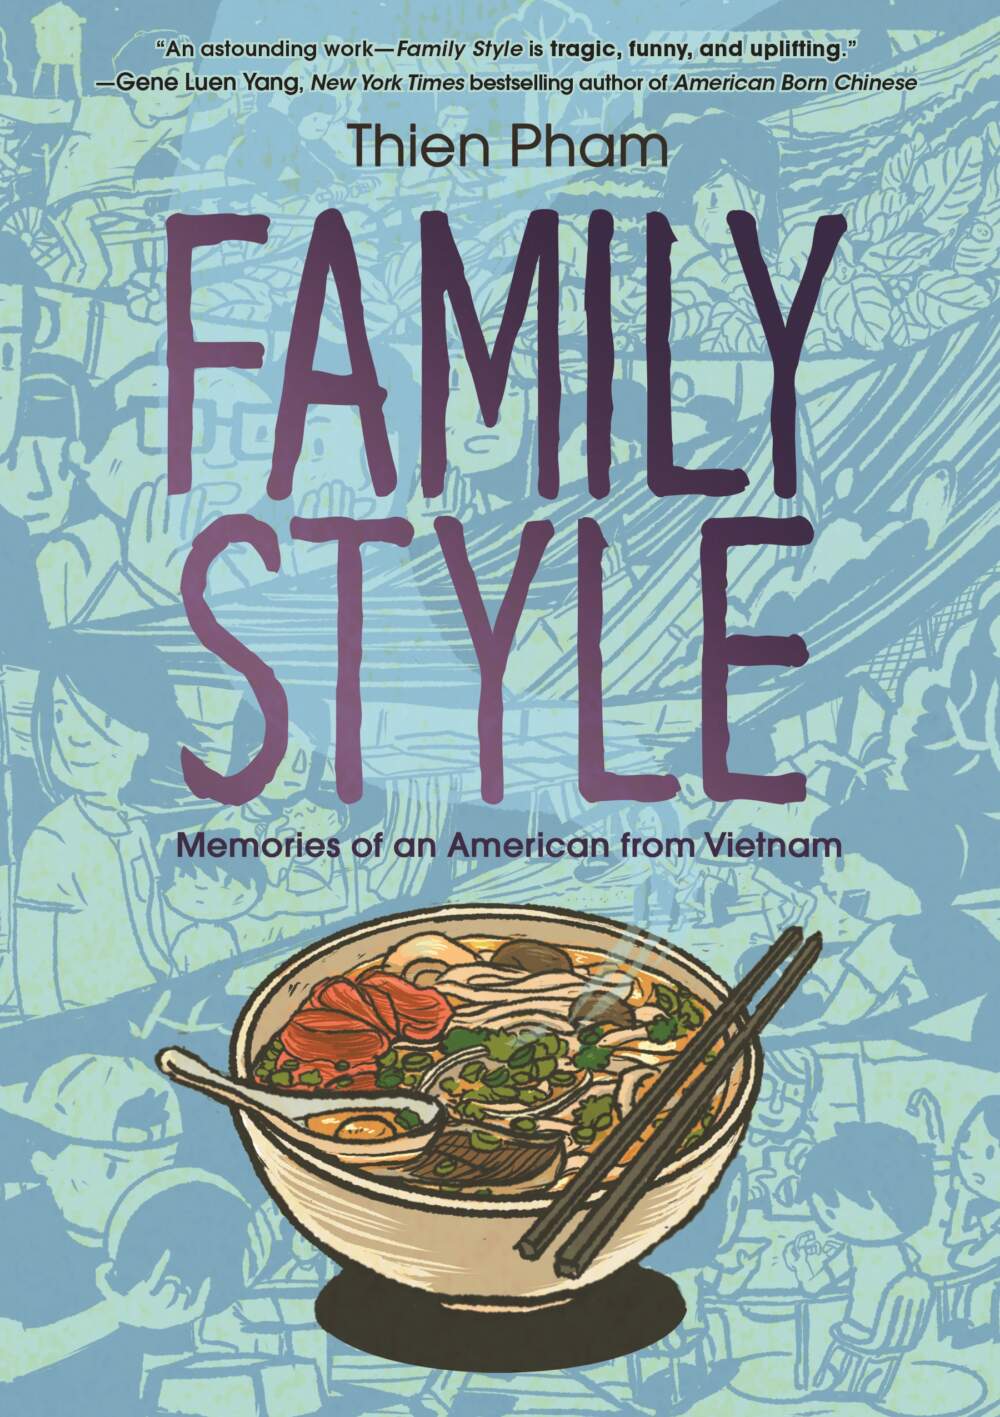 The cover of "Family Style: Memories of an American from Vietnam." (Courtesy of Thien Pham / Macmillan Children's Publishing Group)